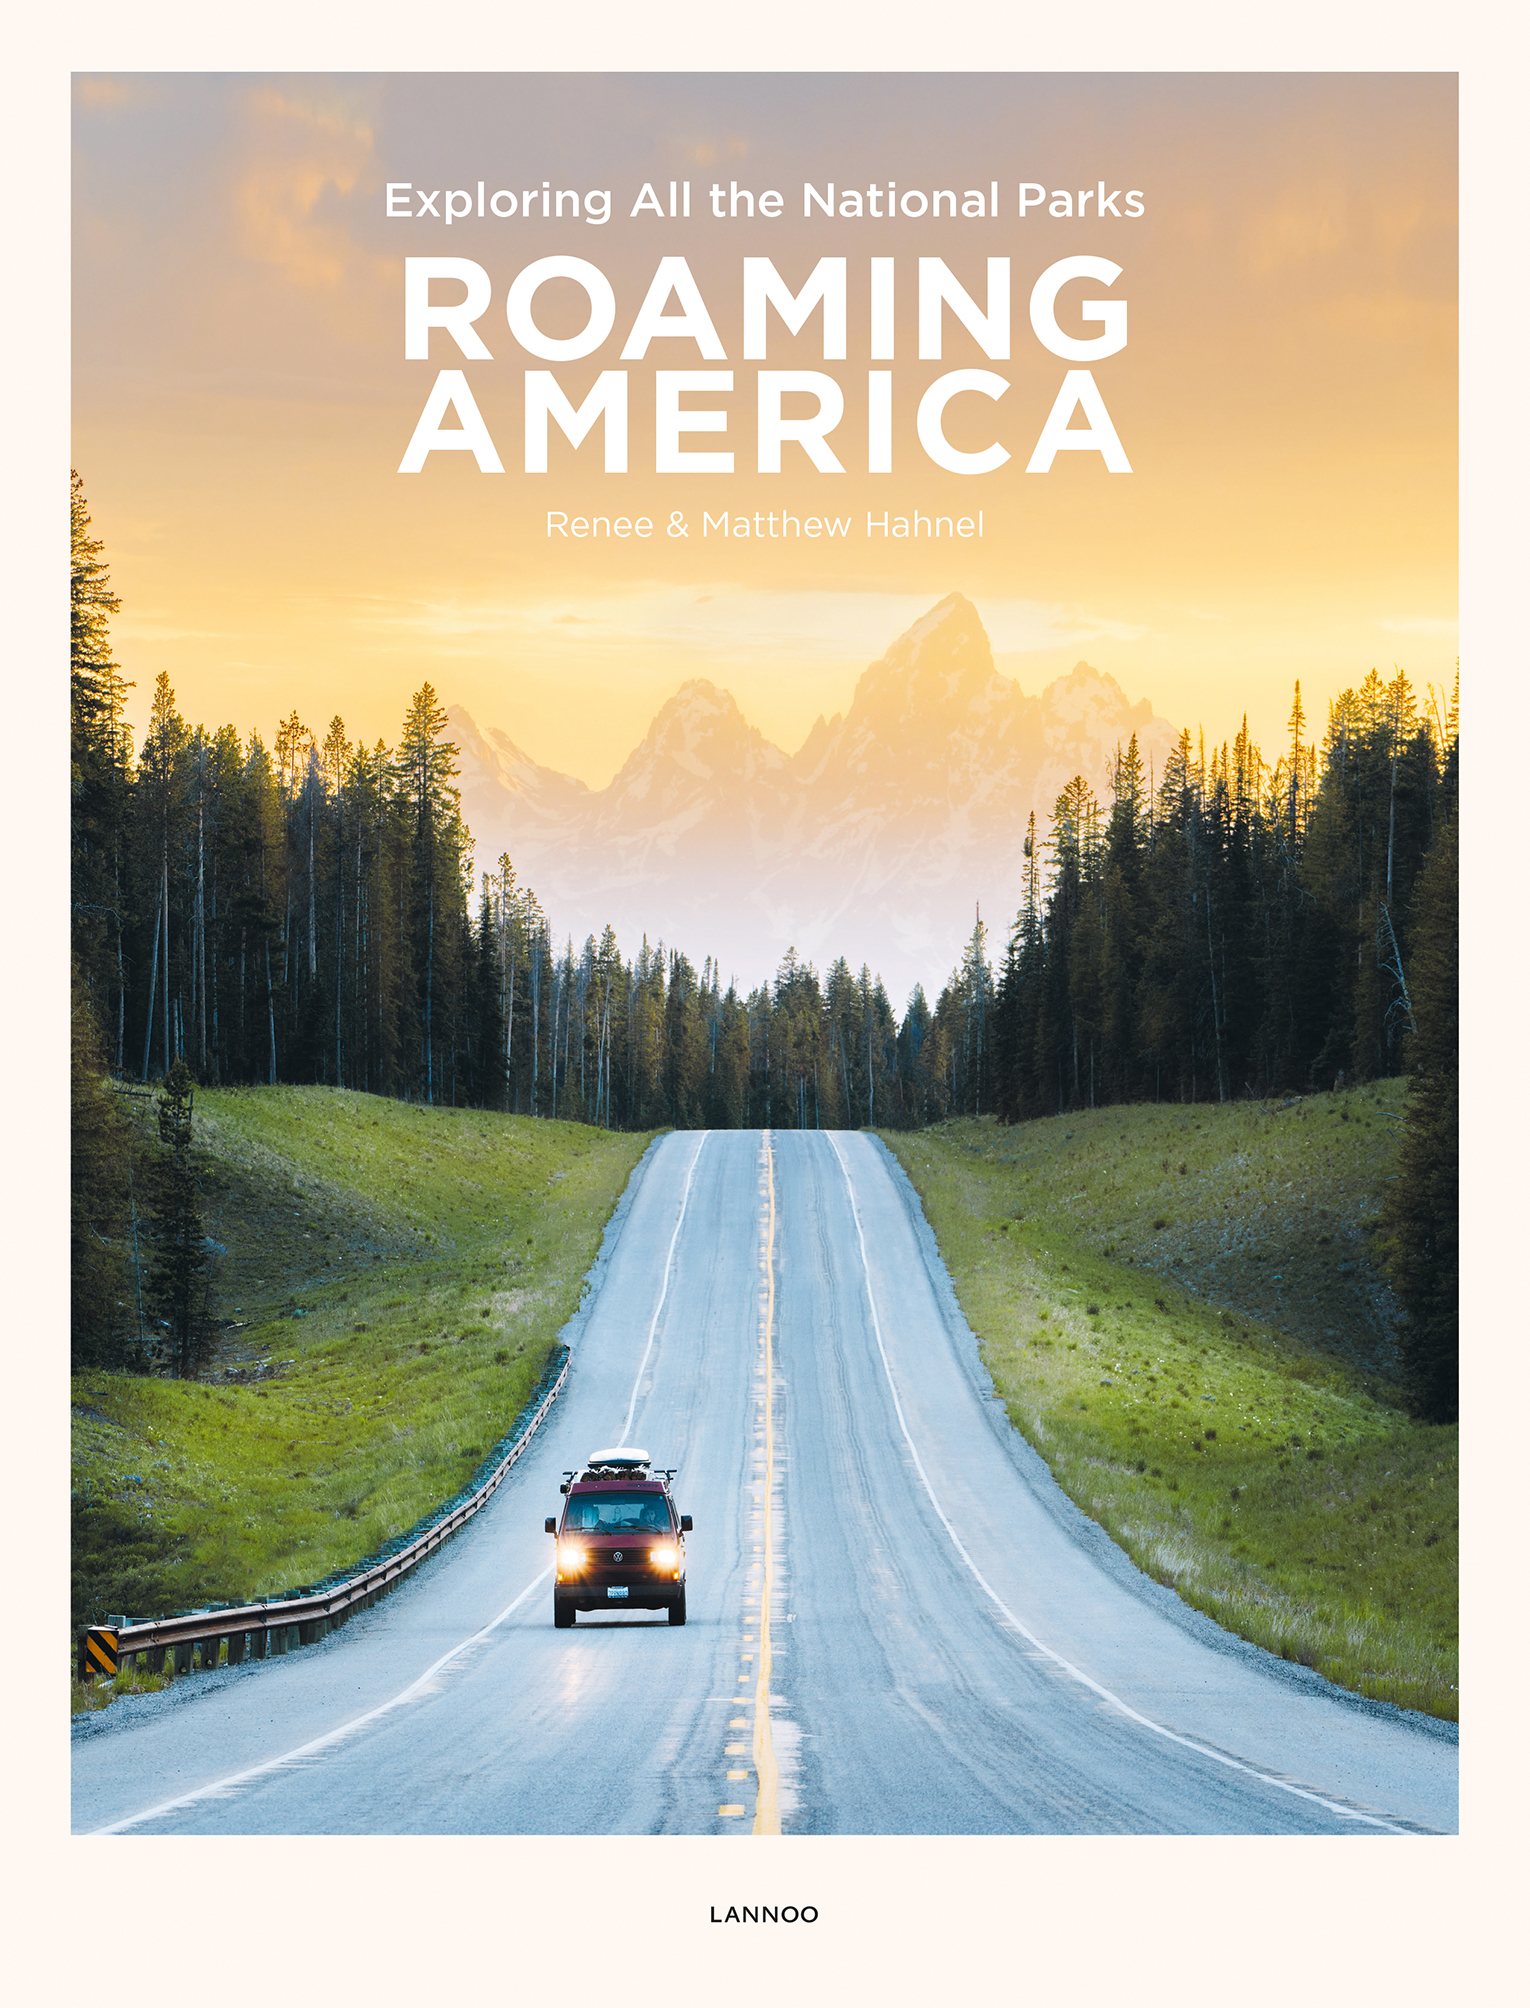 Roaming America - Exploring All The National Parks